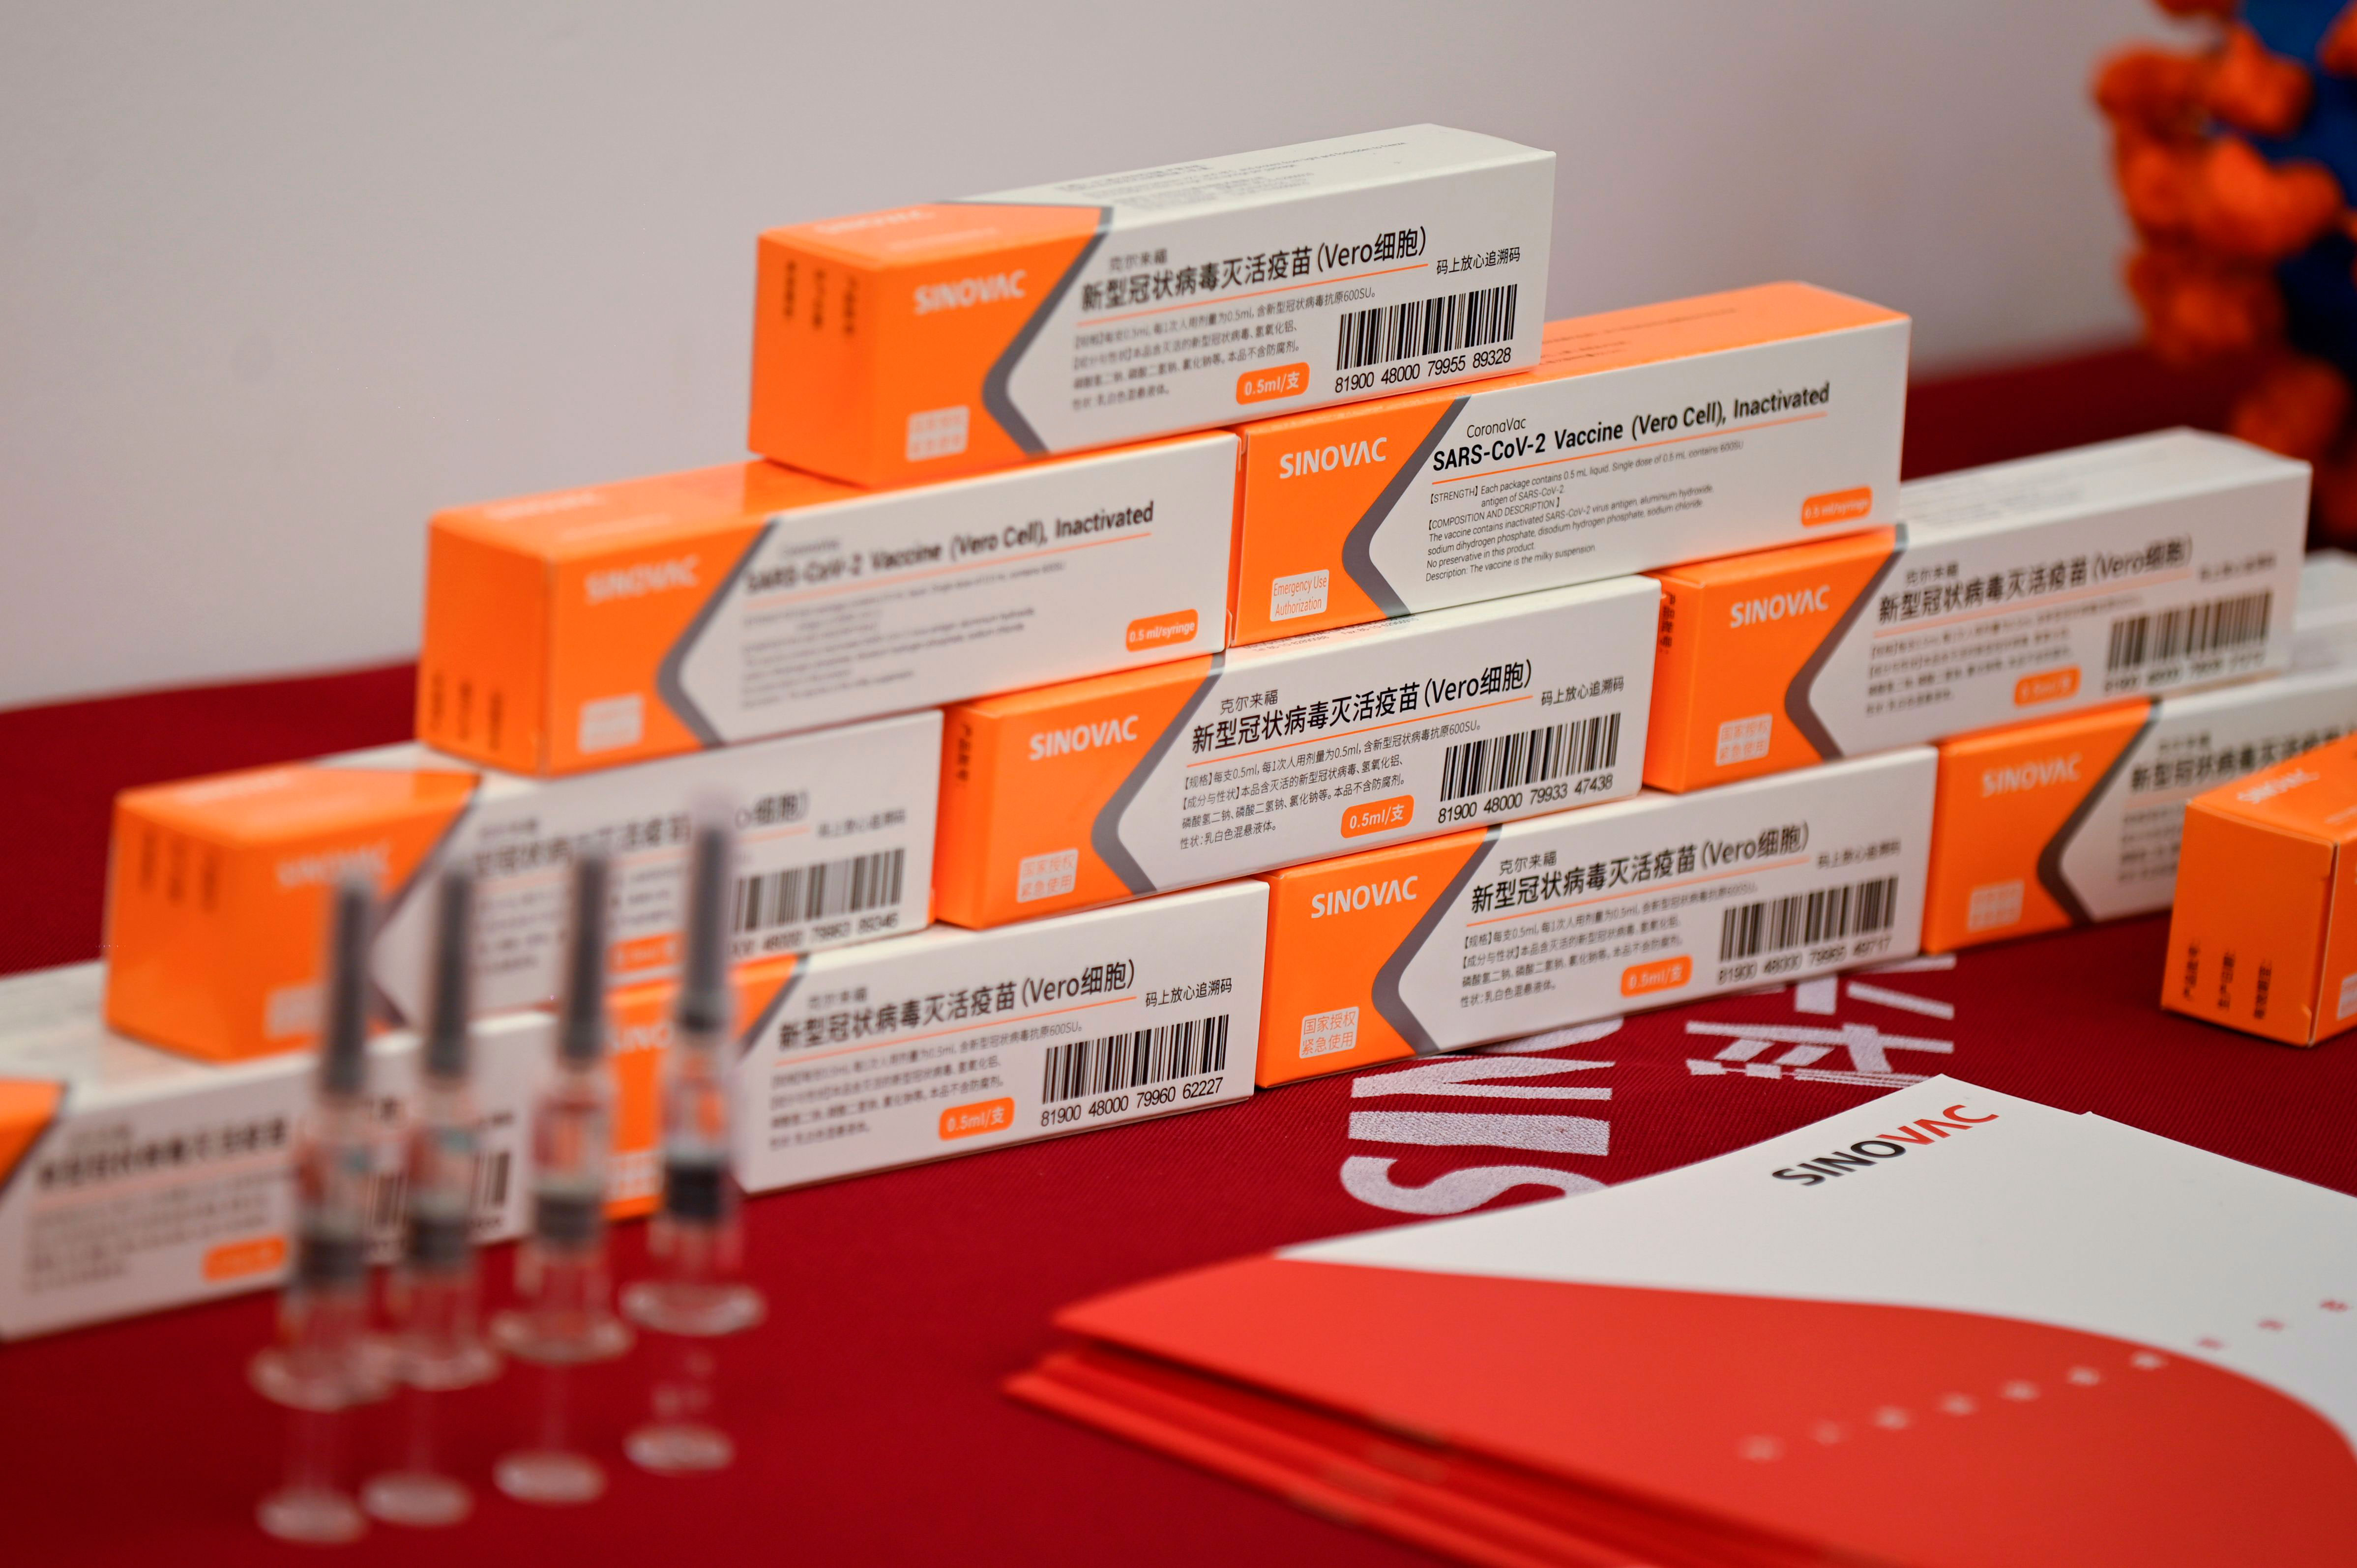 Sinovac Covid-19 vaccines are displayed at a press conference in Beijing in September 2020.